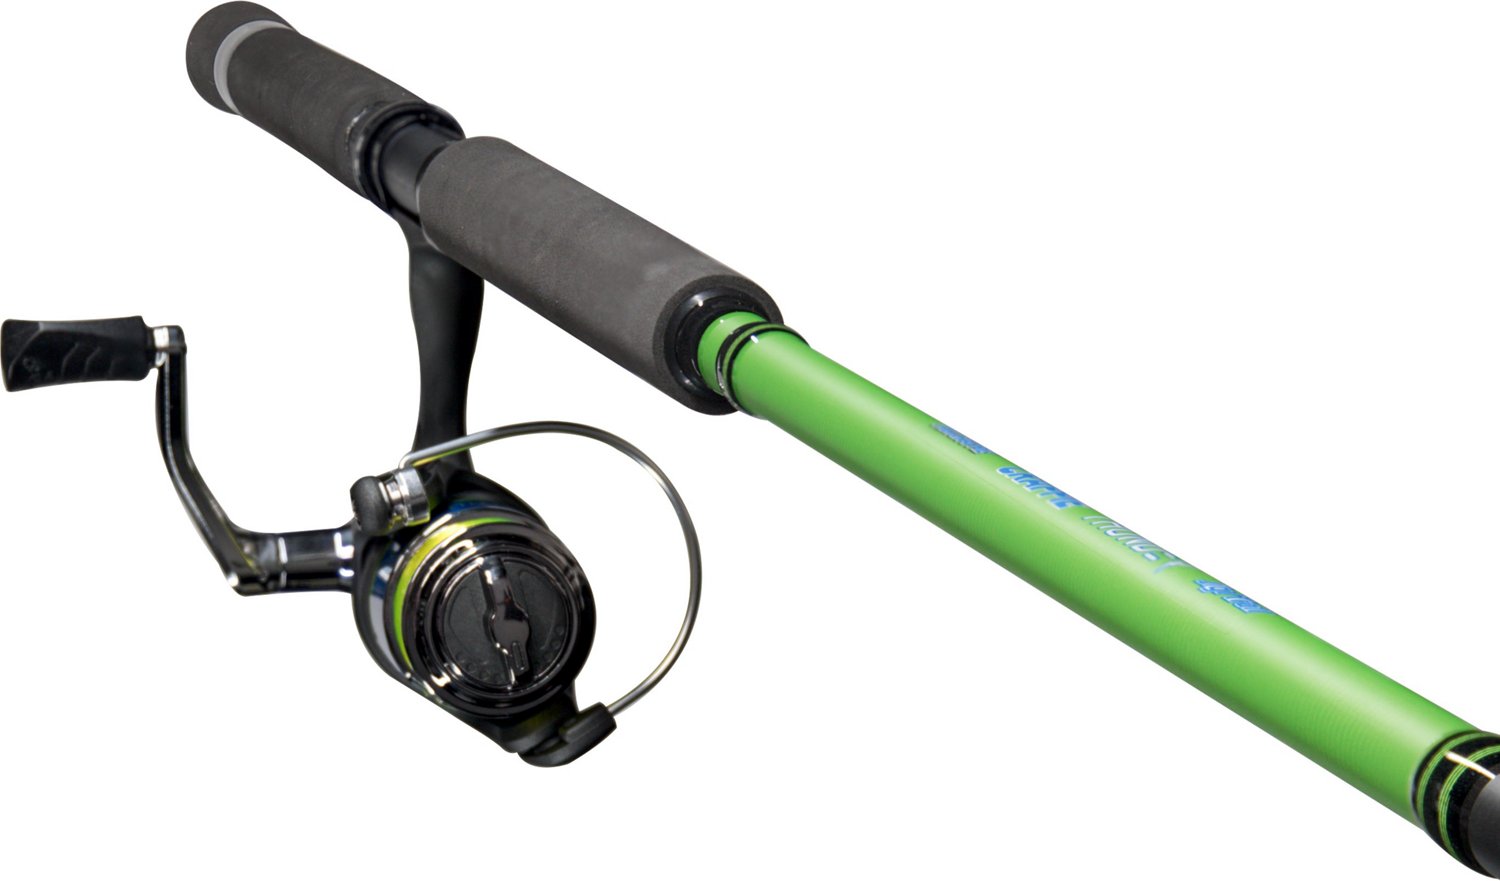 Academy Sports + Outdoors Crappie Thunder Jig/Troll Spin Rod And Reel Combo